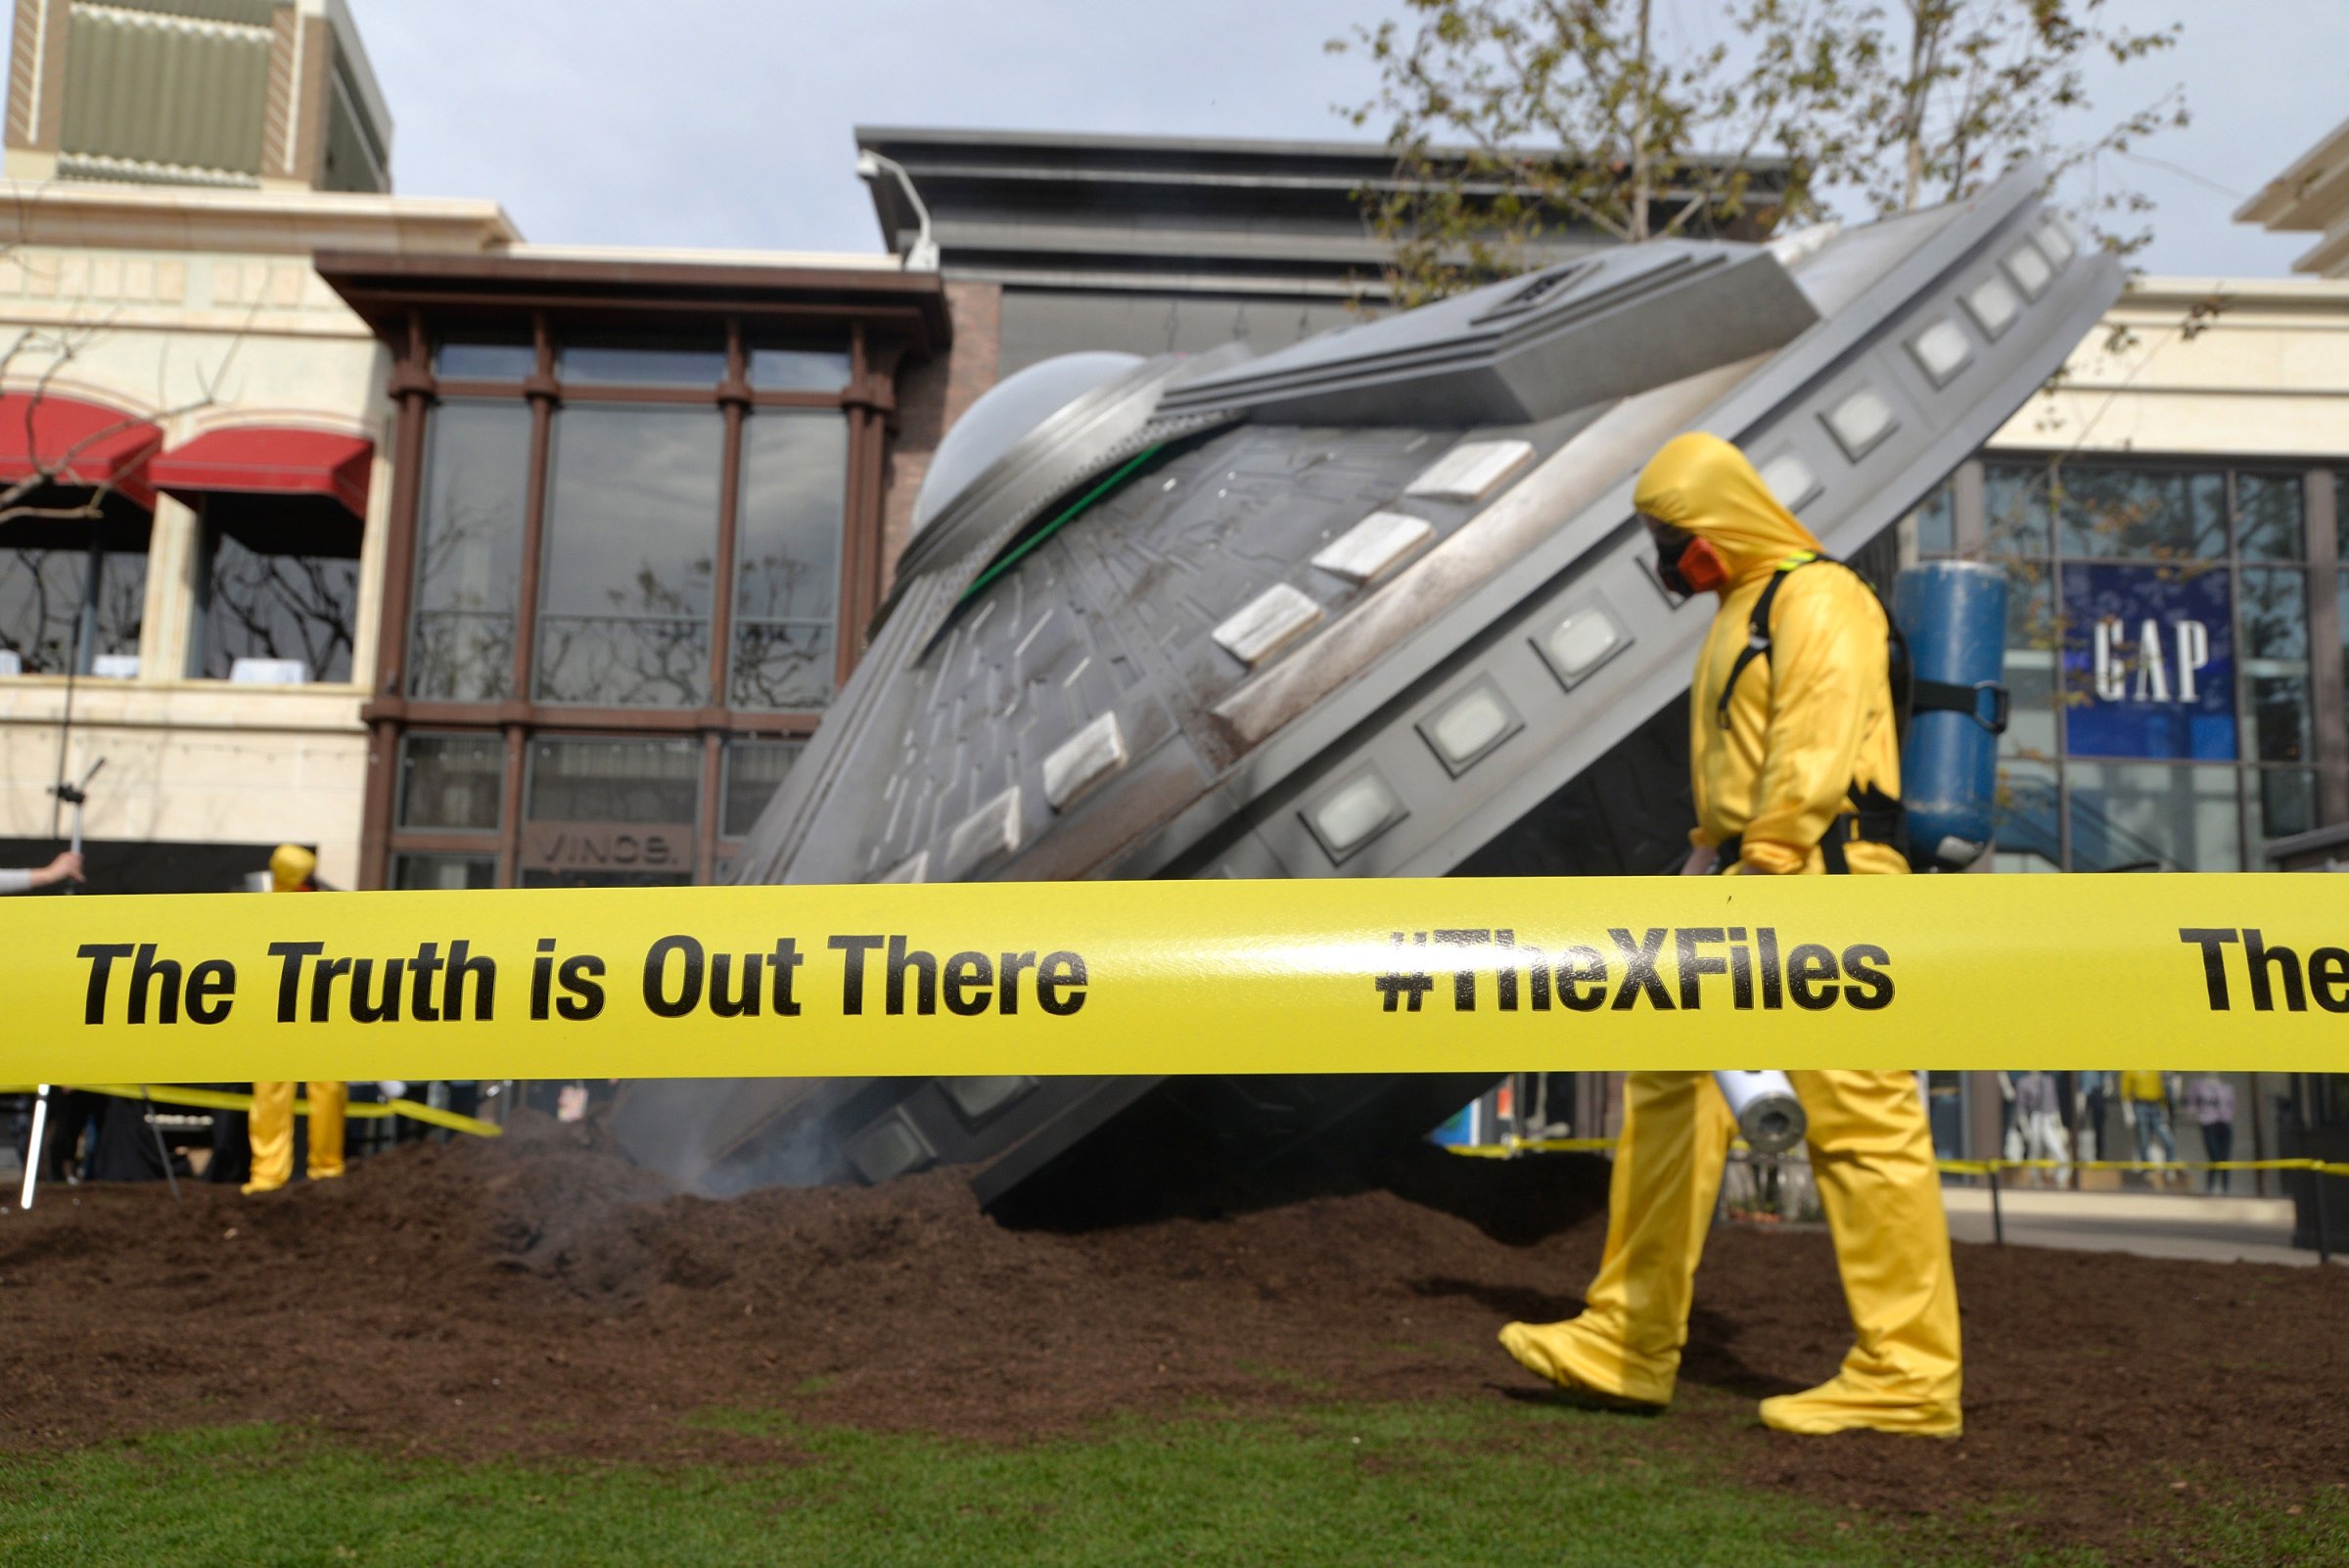 Atmosphere shot of a crashed UFO at a premiere episode screening of FOX's "The X-Files" at The Grove in Los Angeles on January 22, 2016.